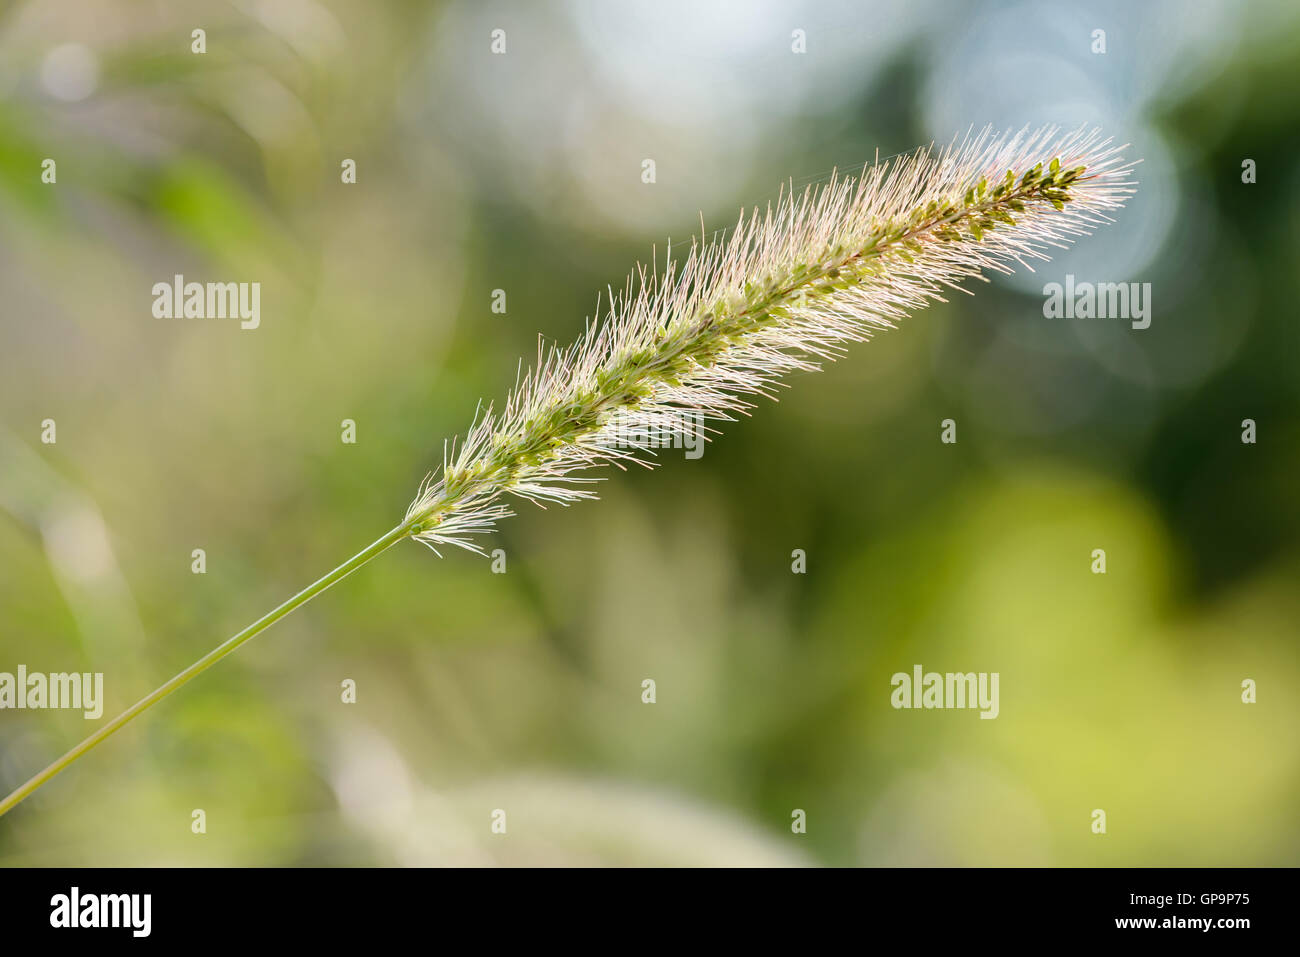 Setaria viridis, also known as foxtail or bristle grasses, growing in the meadow Stock Photo